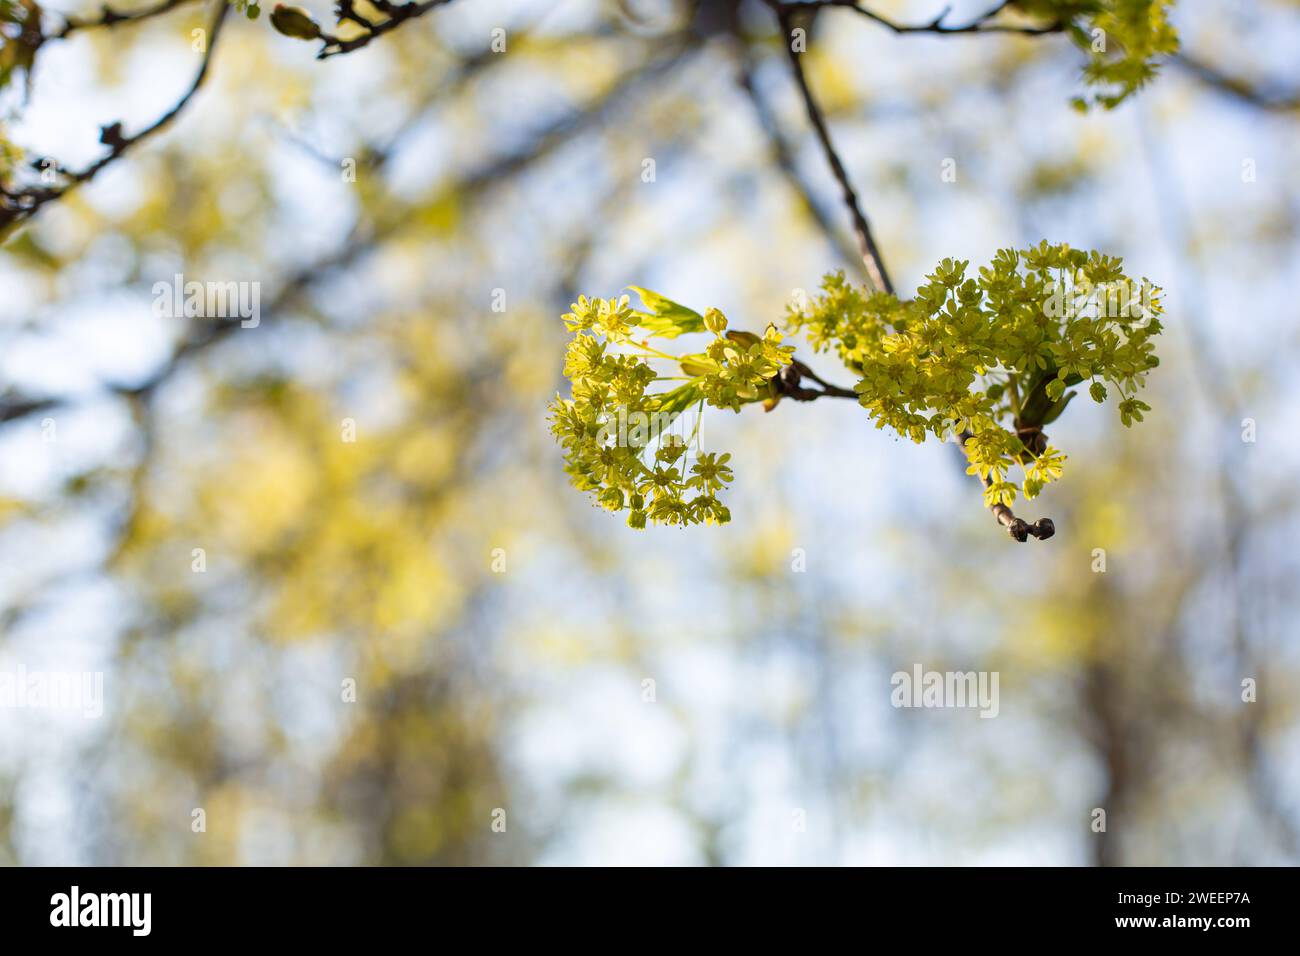 Spring flowers on maple tree nature outdoor Stock Photo